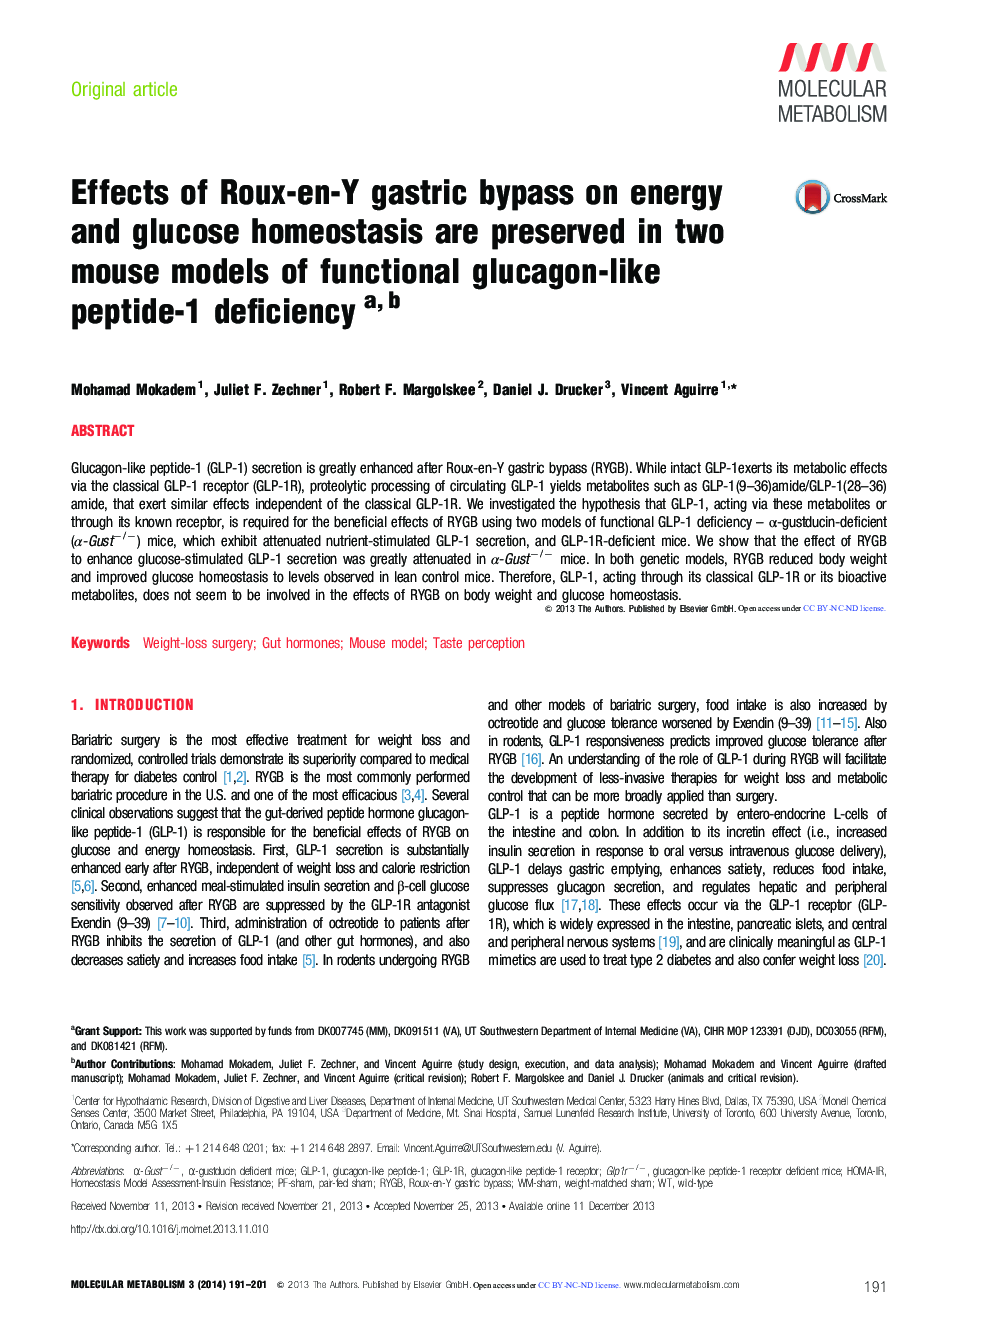 Effects of Roux-en-Y gastric bypass on energy and glucose homeostasis are preserved in two mouse models of functional glucagon-like peptide-1 deficiency ab